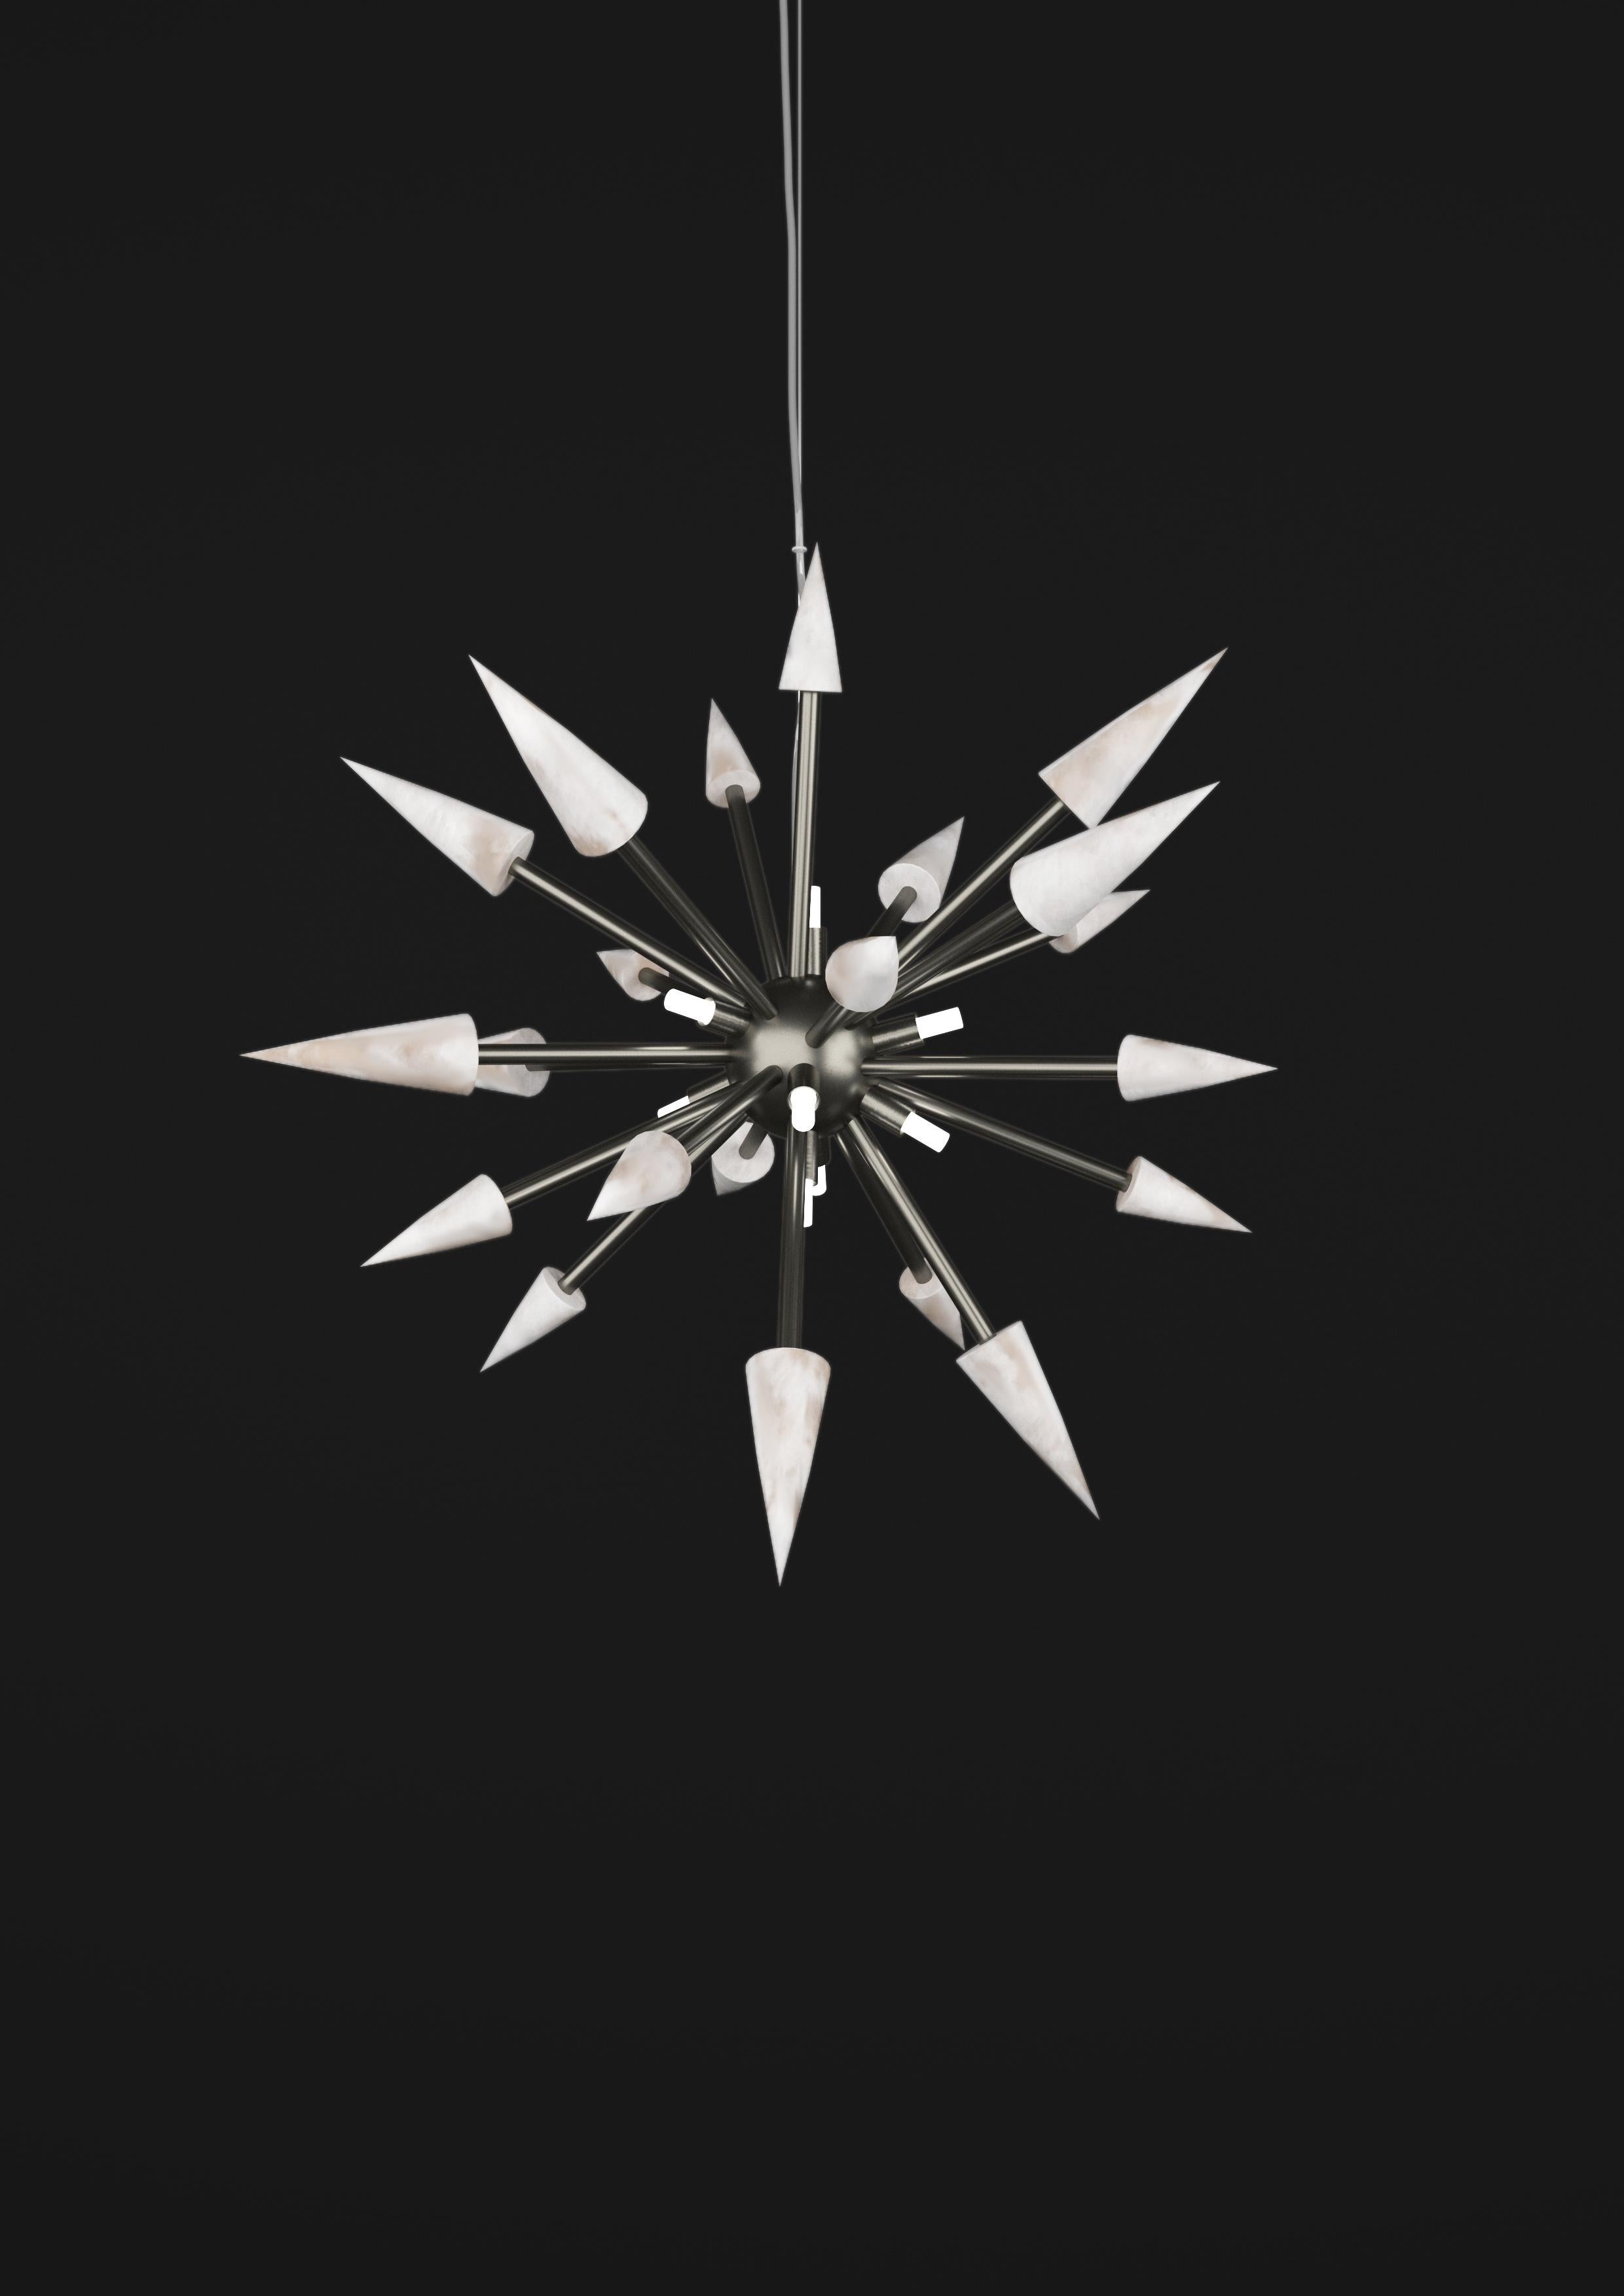 Perseo 50 Brushed Black Metal Pendant Lamp by Alabastro Italiano
Dimensions: Ø 50 x H 300 cm.
Materials: White alabaster and metal.

Available in different finishes: Shiny Silver, Bronze, Brushed Brass, Ruggine of Florence, Brushed Burnished, Shiny